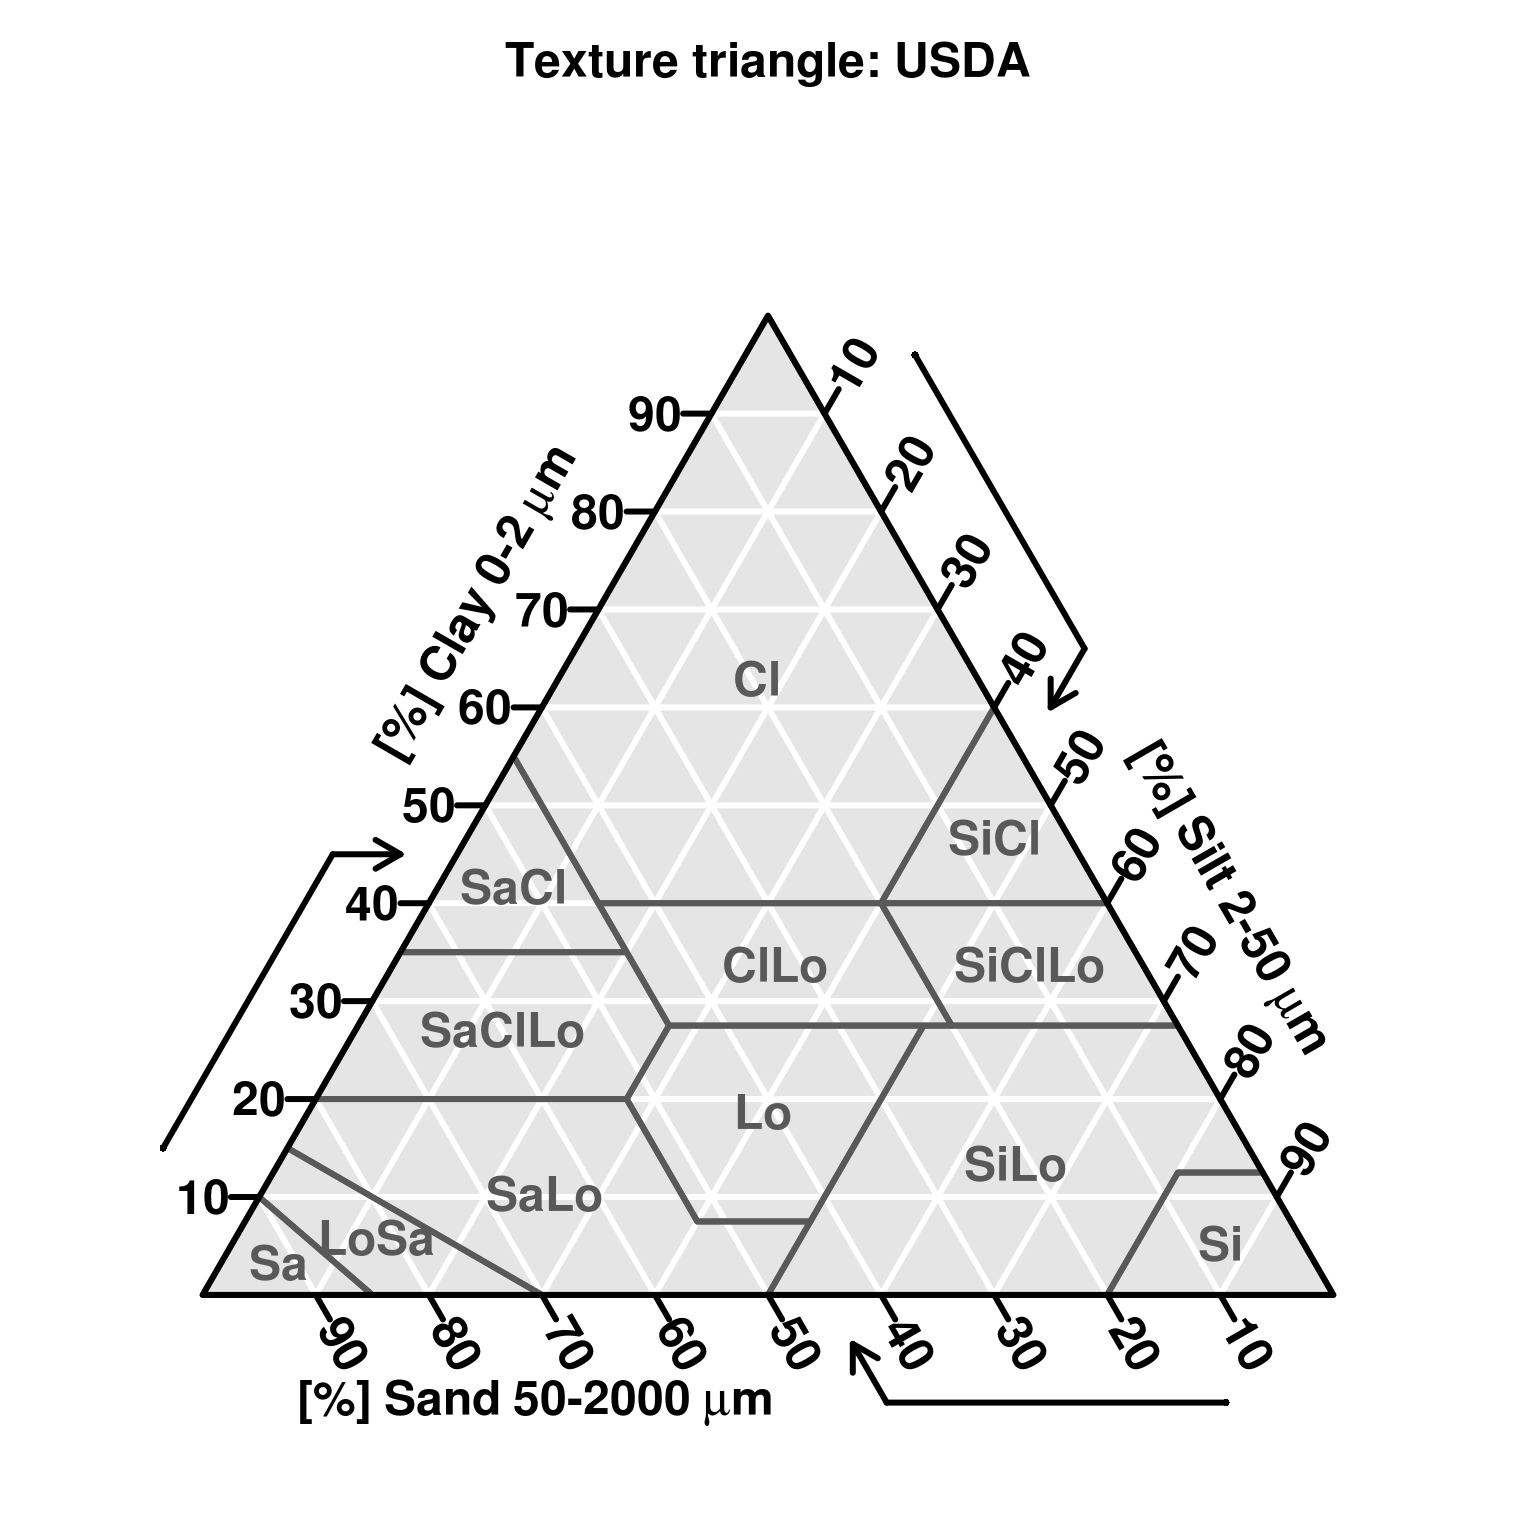 Soil texture triangle based on the USDA system. Generated using the soiltexture package (http://cran.r-project.org/web/packages/soiltexture/).